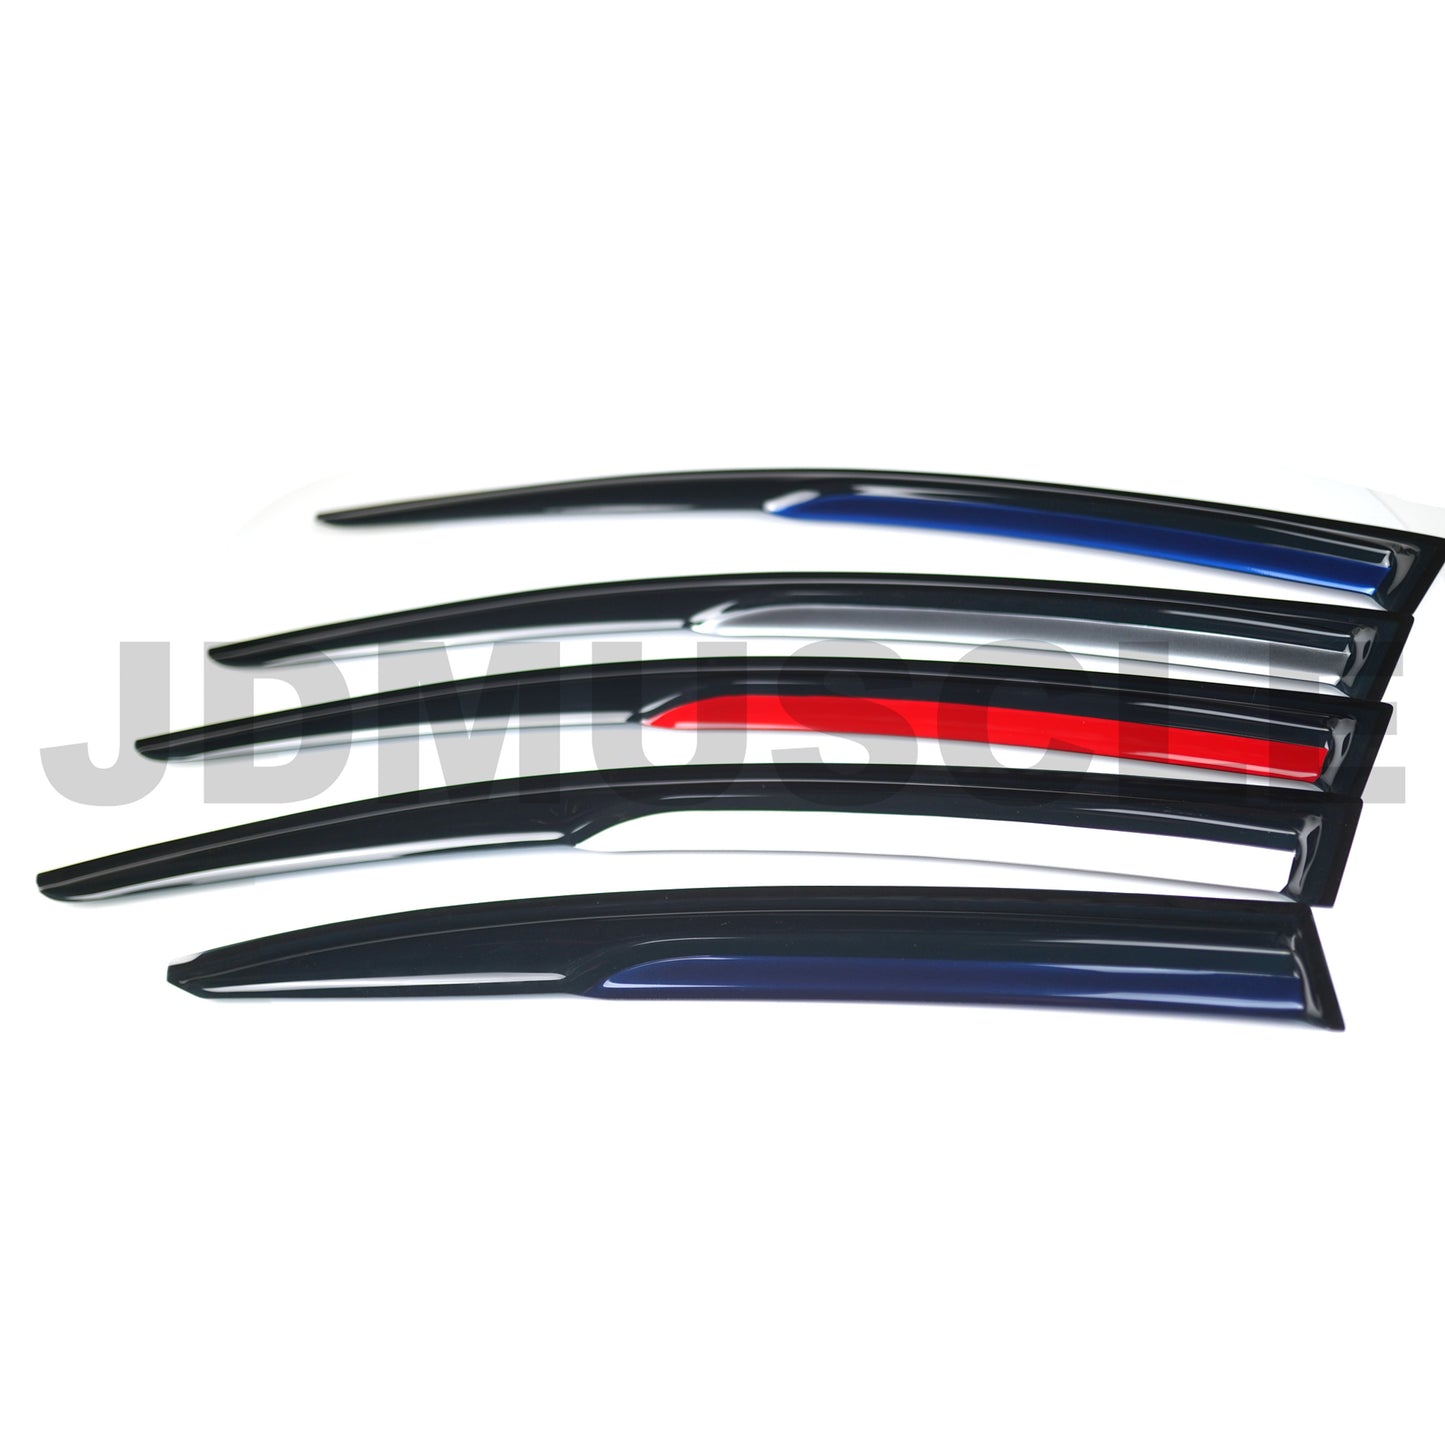 JDMuscle Rain Guard V2 with Color Accent for Subaru WRX / STI 2015-2020-Rain Guards-JDMuscle-JDMuscle